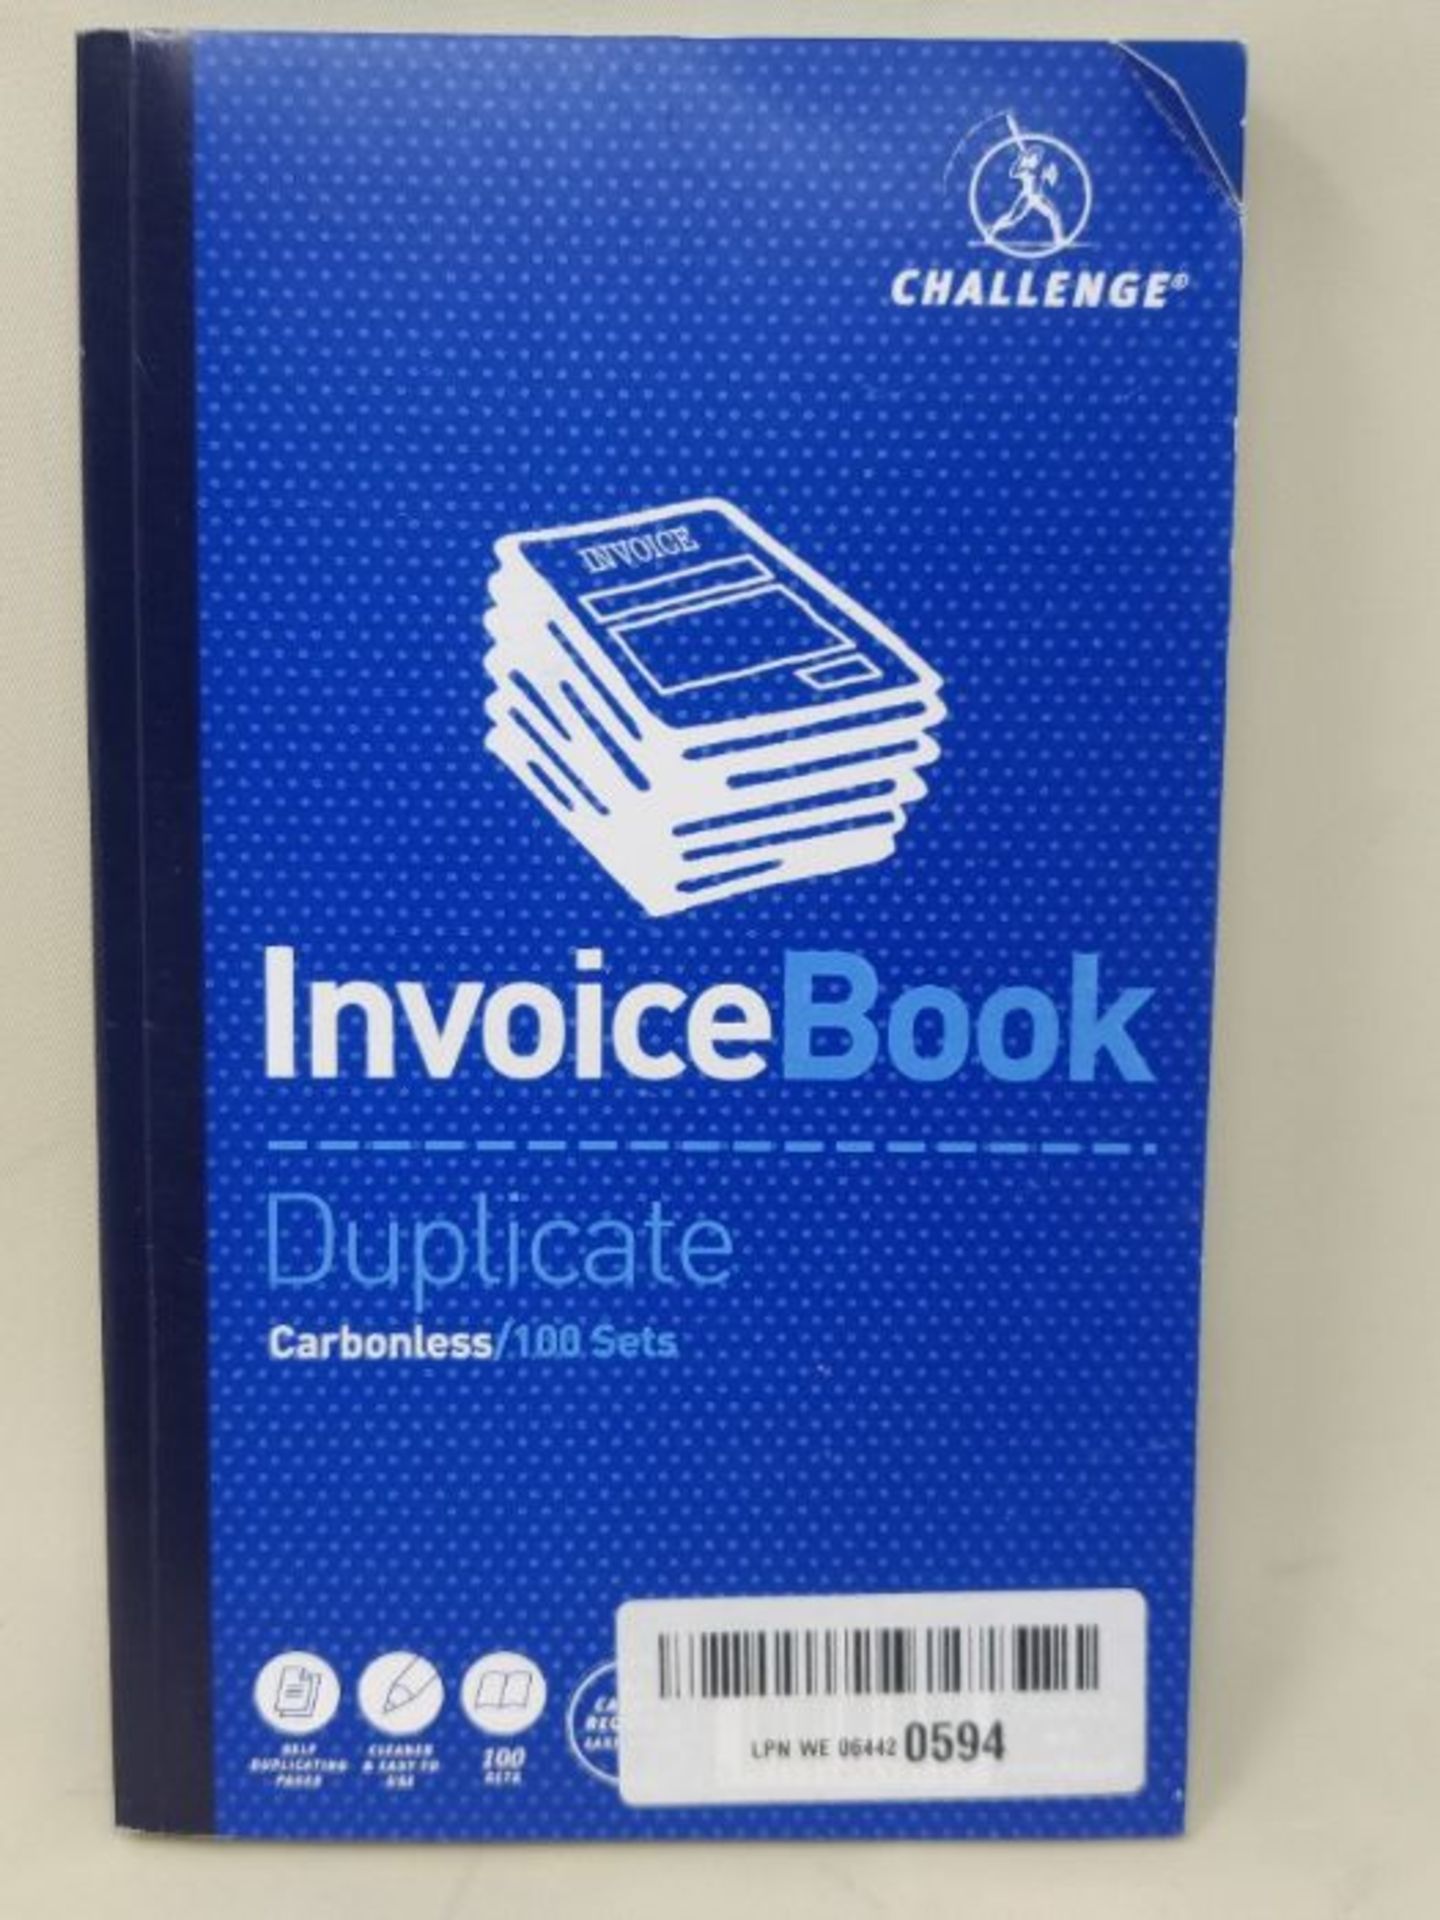 Challenge 210 x 130 mm Duplicate Book Carbonless Invoice without Vat/Tax, 100 Pages, S - Image 2 of 2